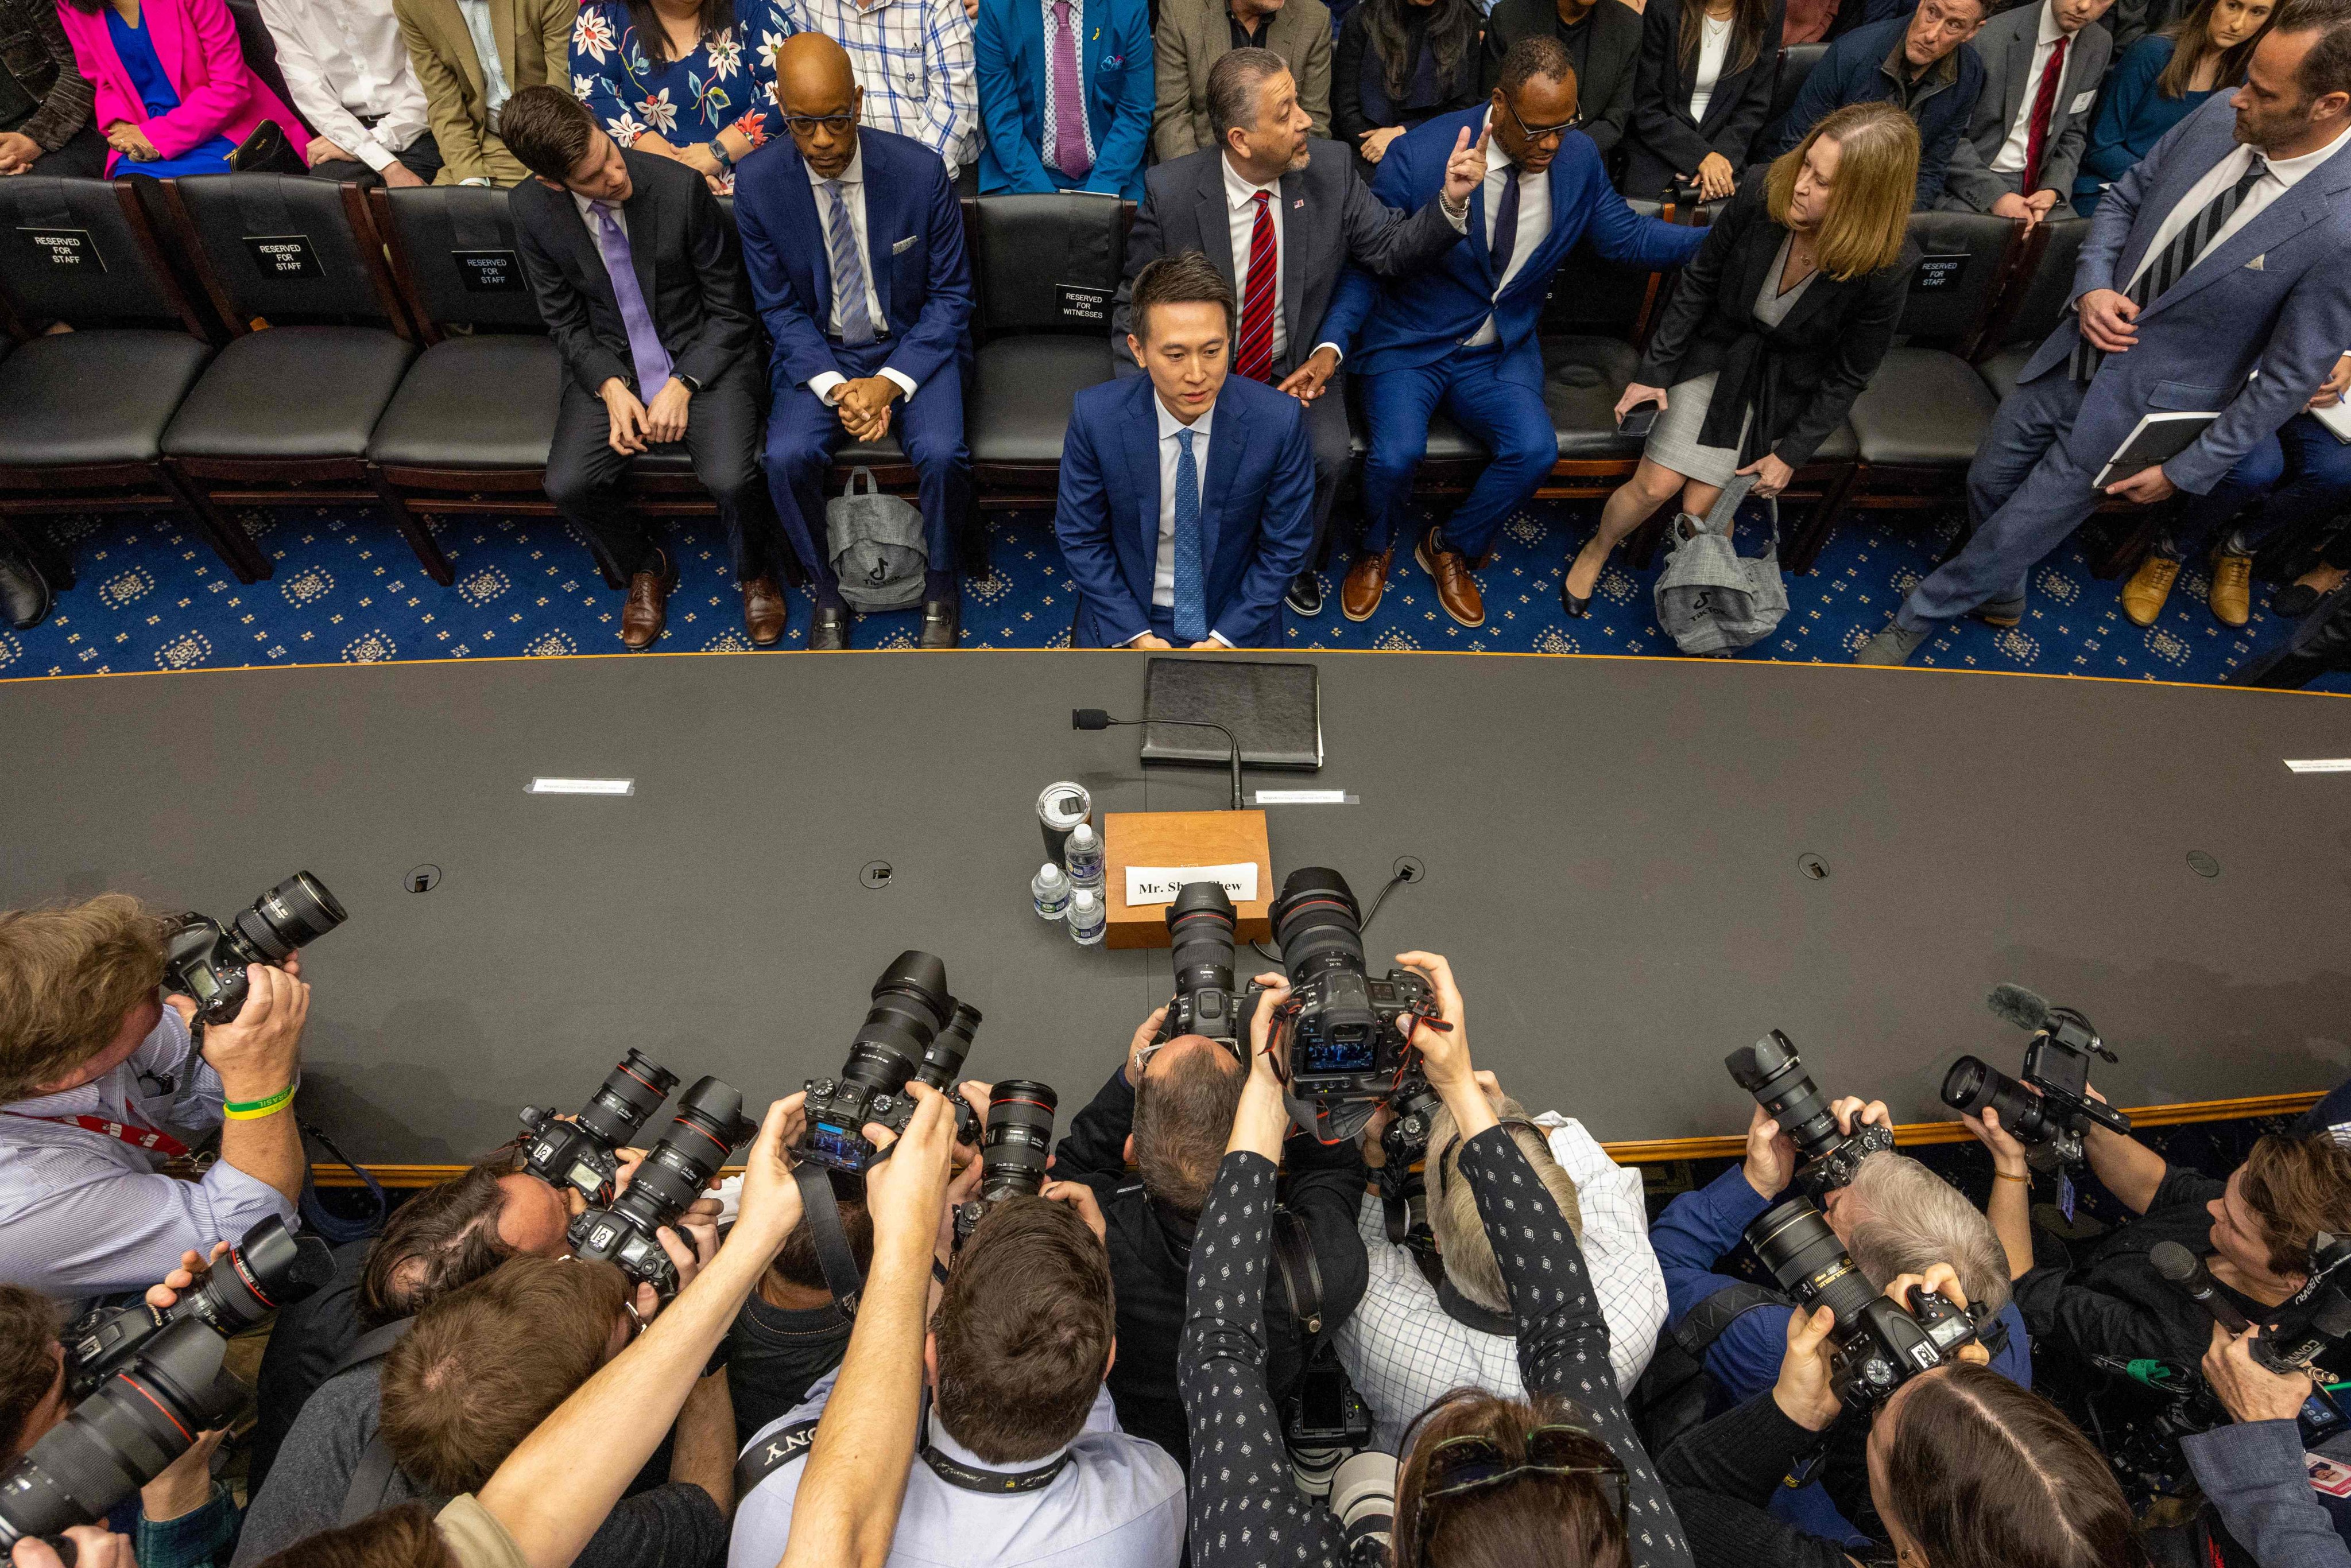 TikTok CEO Chew Shou Zi prepares to testify before the House Energy and Commerce Committee at the US Congress on Capitol Hill on March 23 in Washington, DC. Photo: Getty Images / AFP